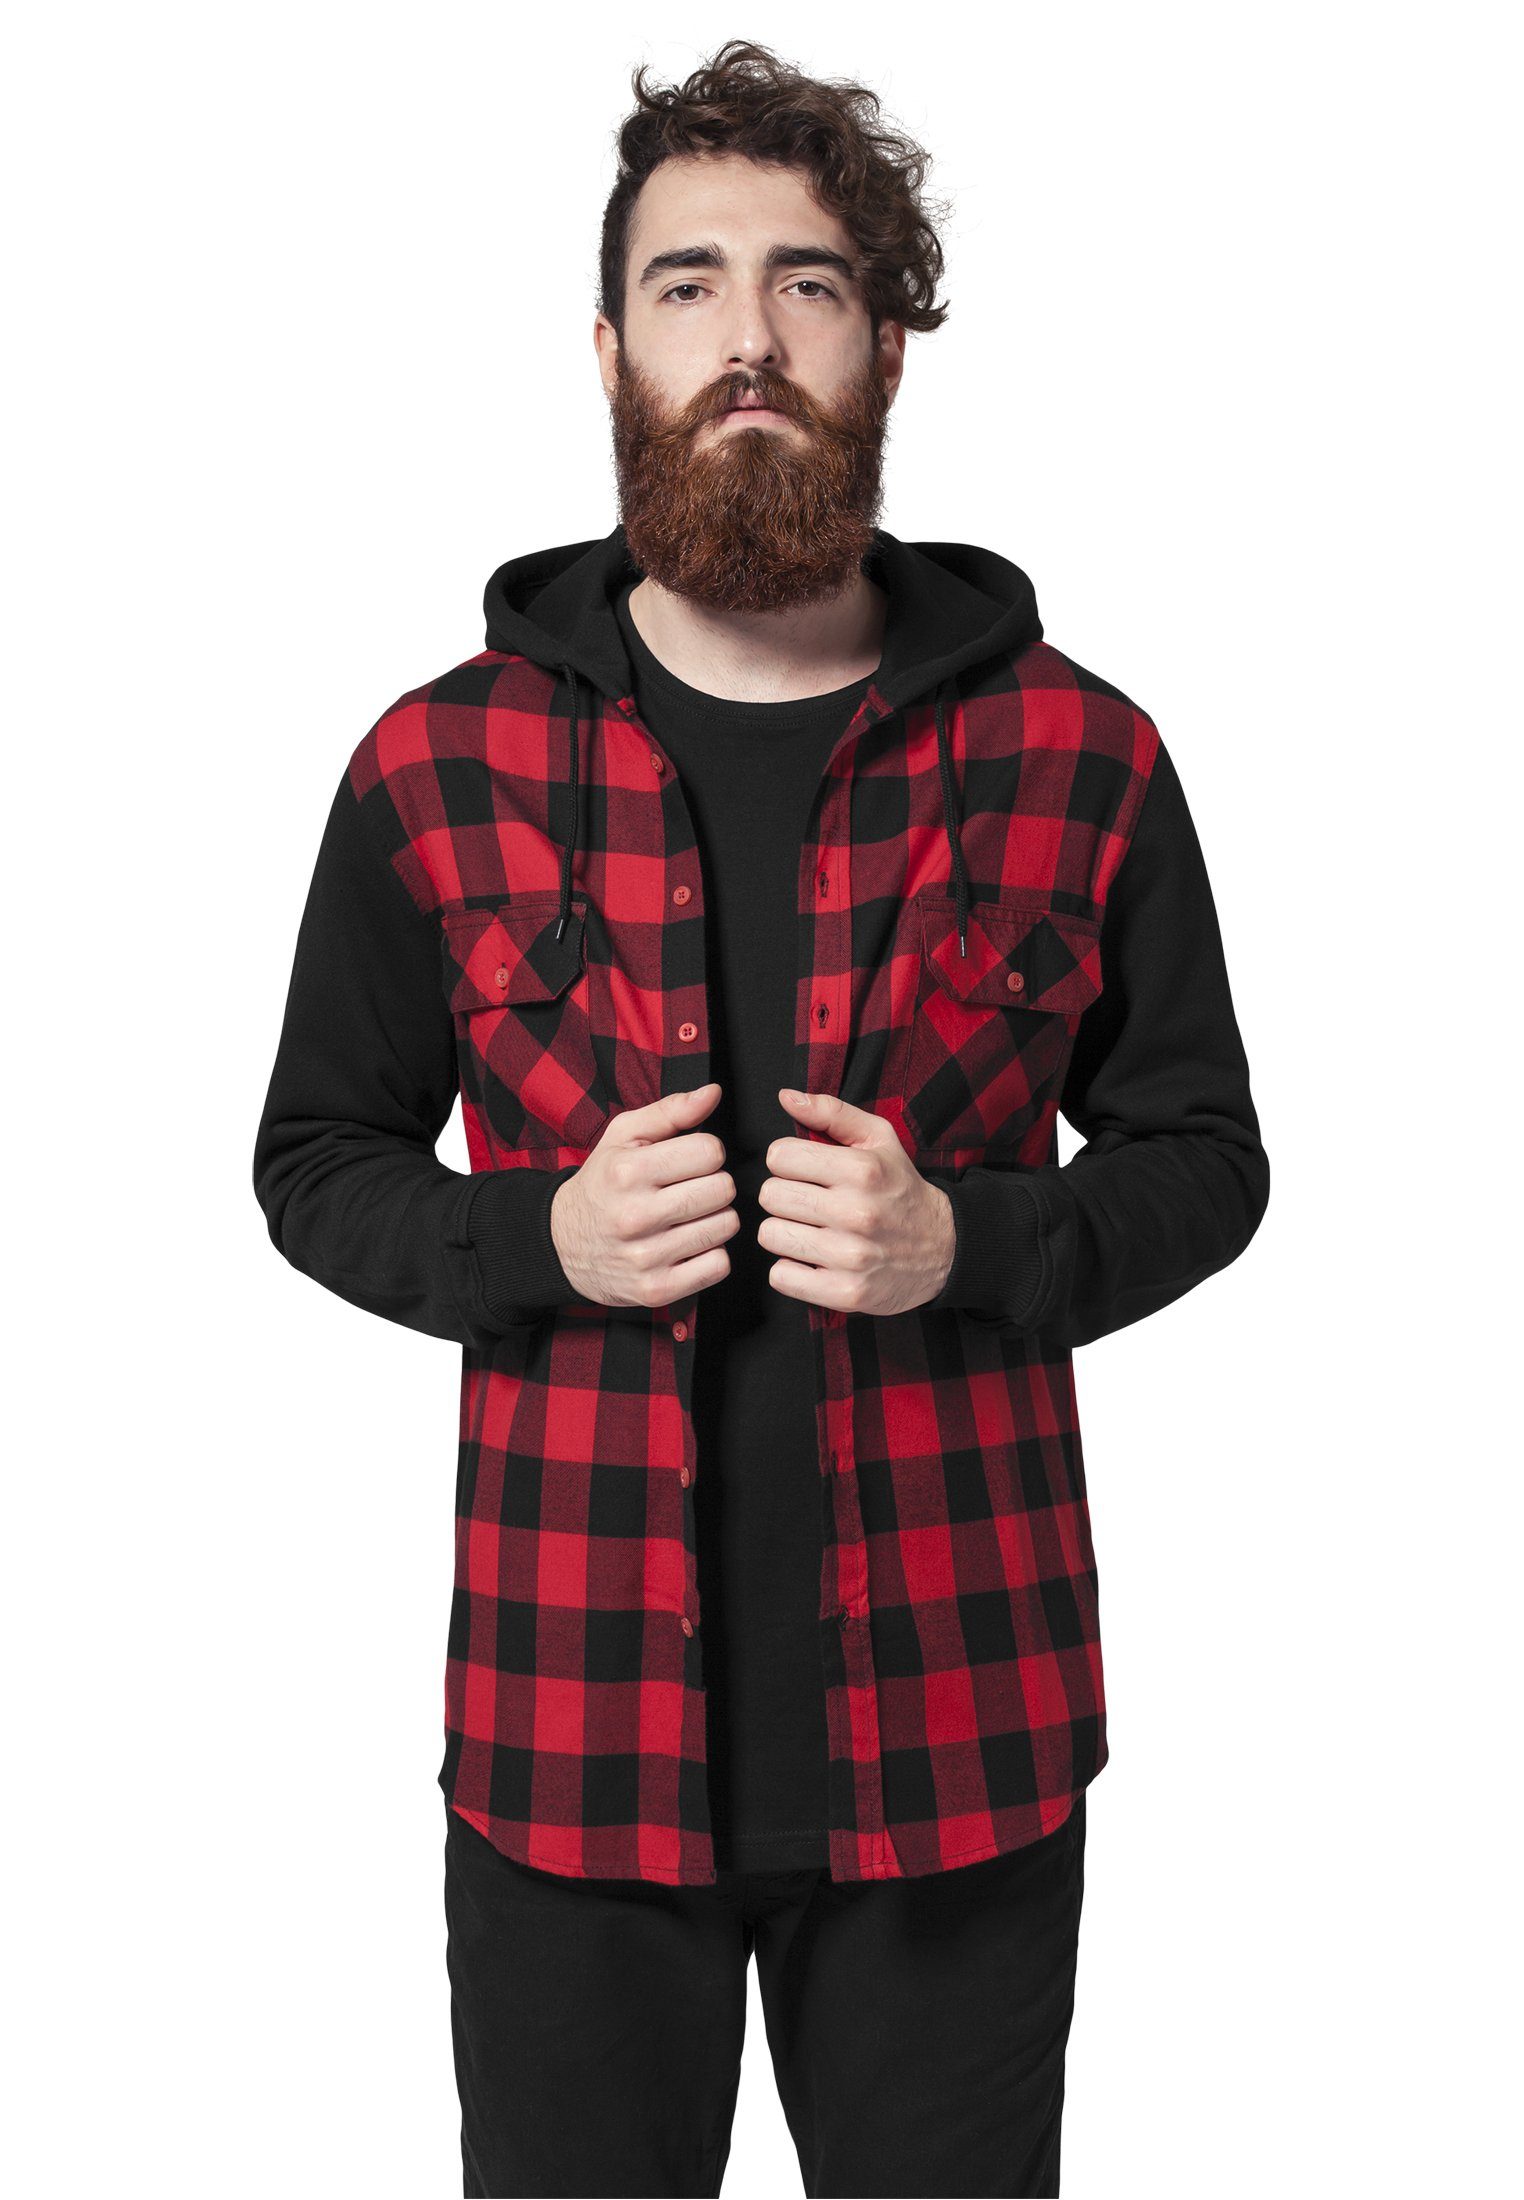 URBAN CLASSICS Shirtjacke Herren Hooded Sweat Sleeve blk/red/bl Flanell (1-tlg) Checked Shirt